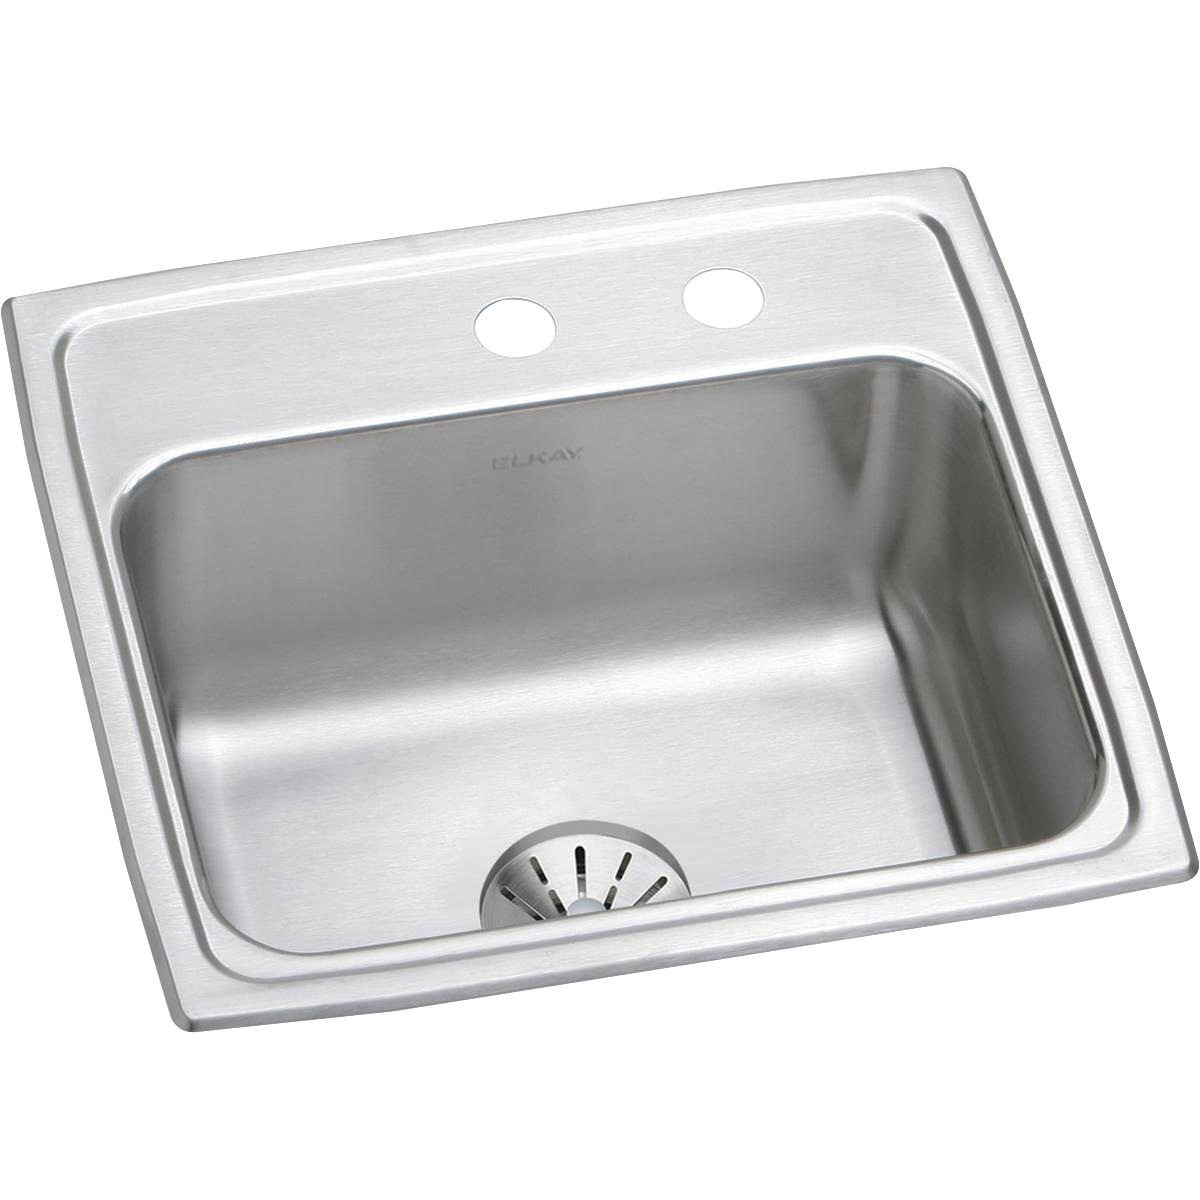 Elkay Lustertone Classic 19-1/2" x 19" x 7-1/2" MR2-Hole Single Bowl Drop-in Sink with Perfect Drain